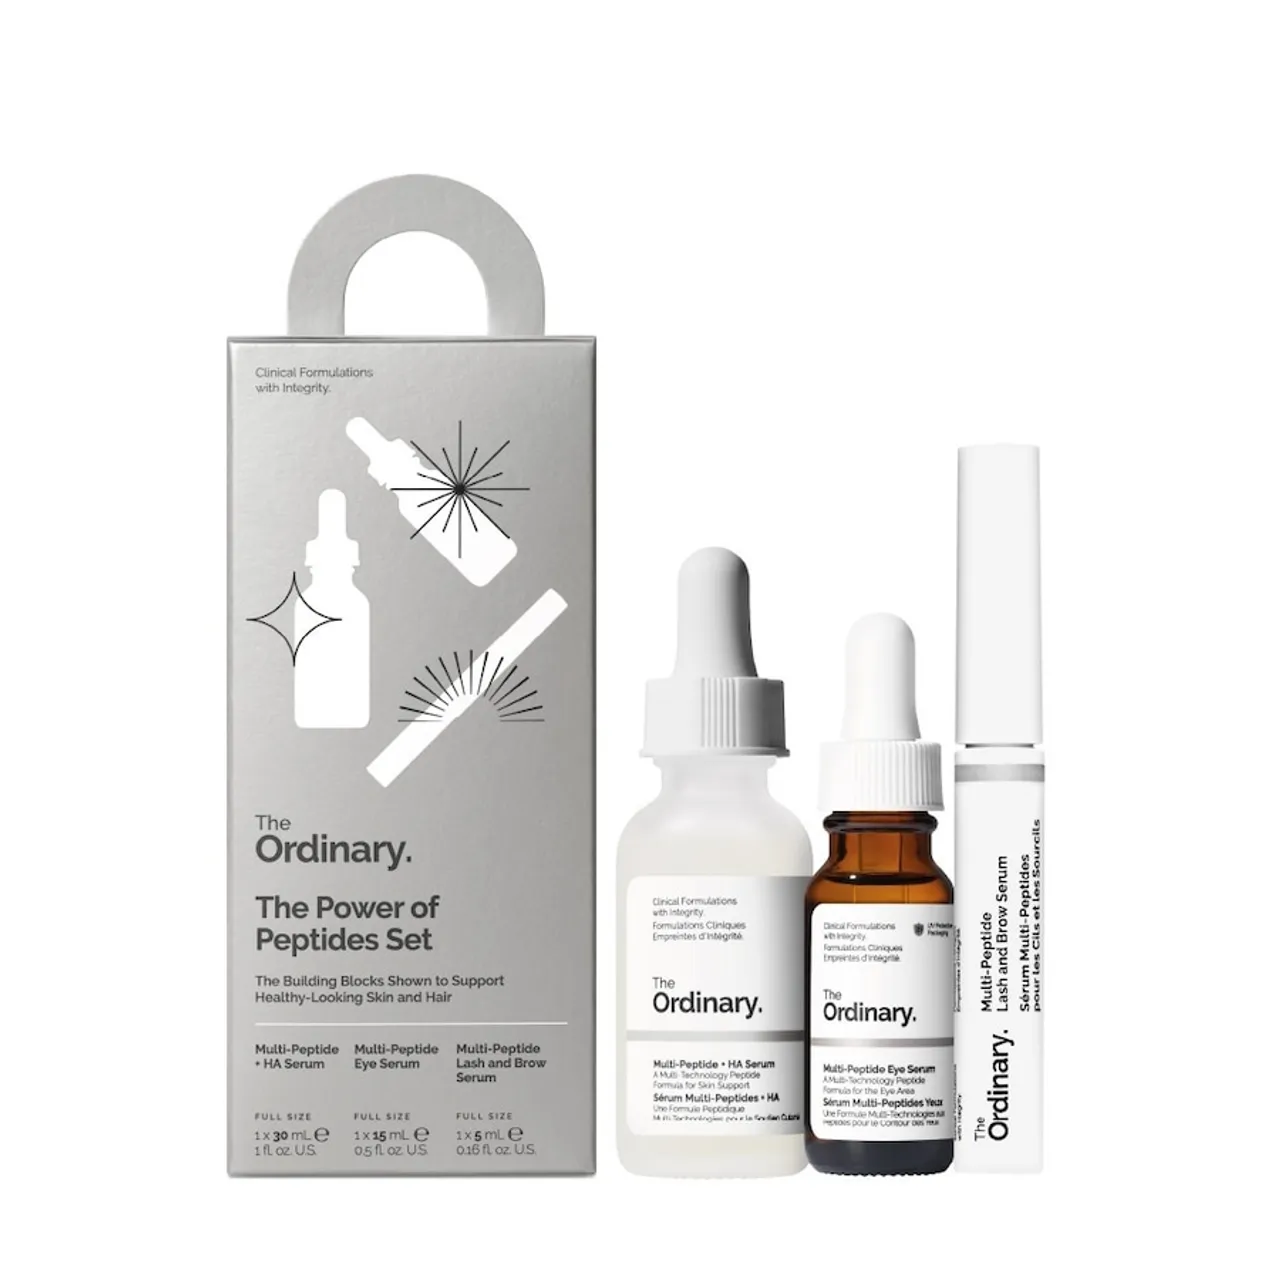 The Ordinary - The Power of Peptides set Gesichtspflegesets